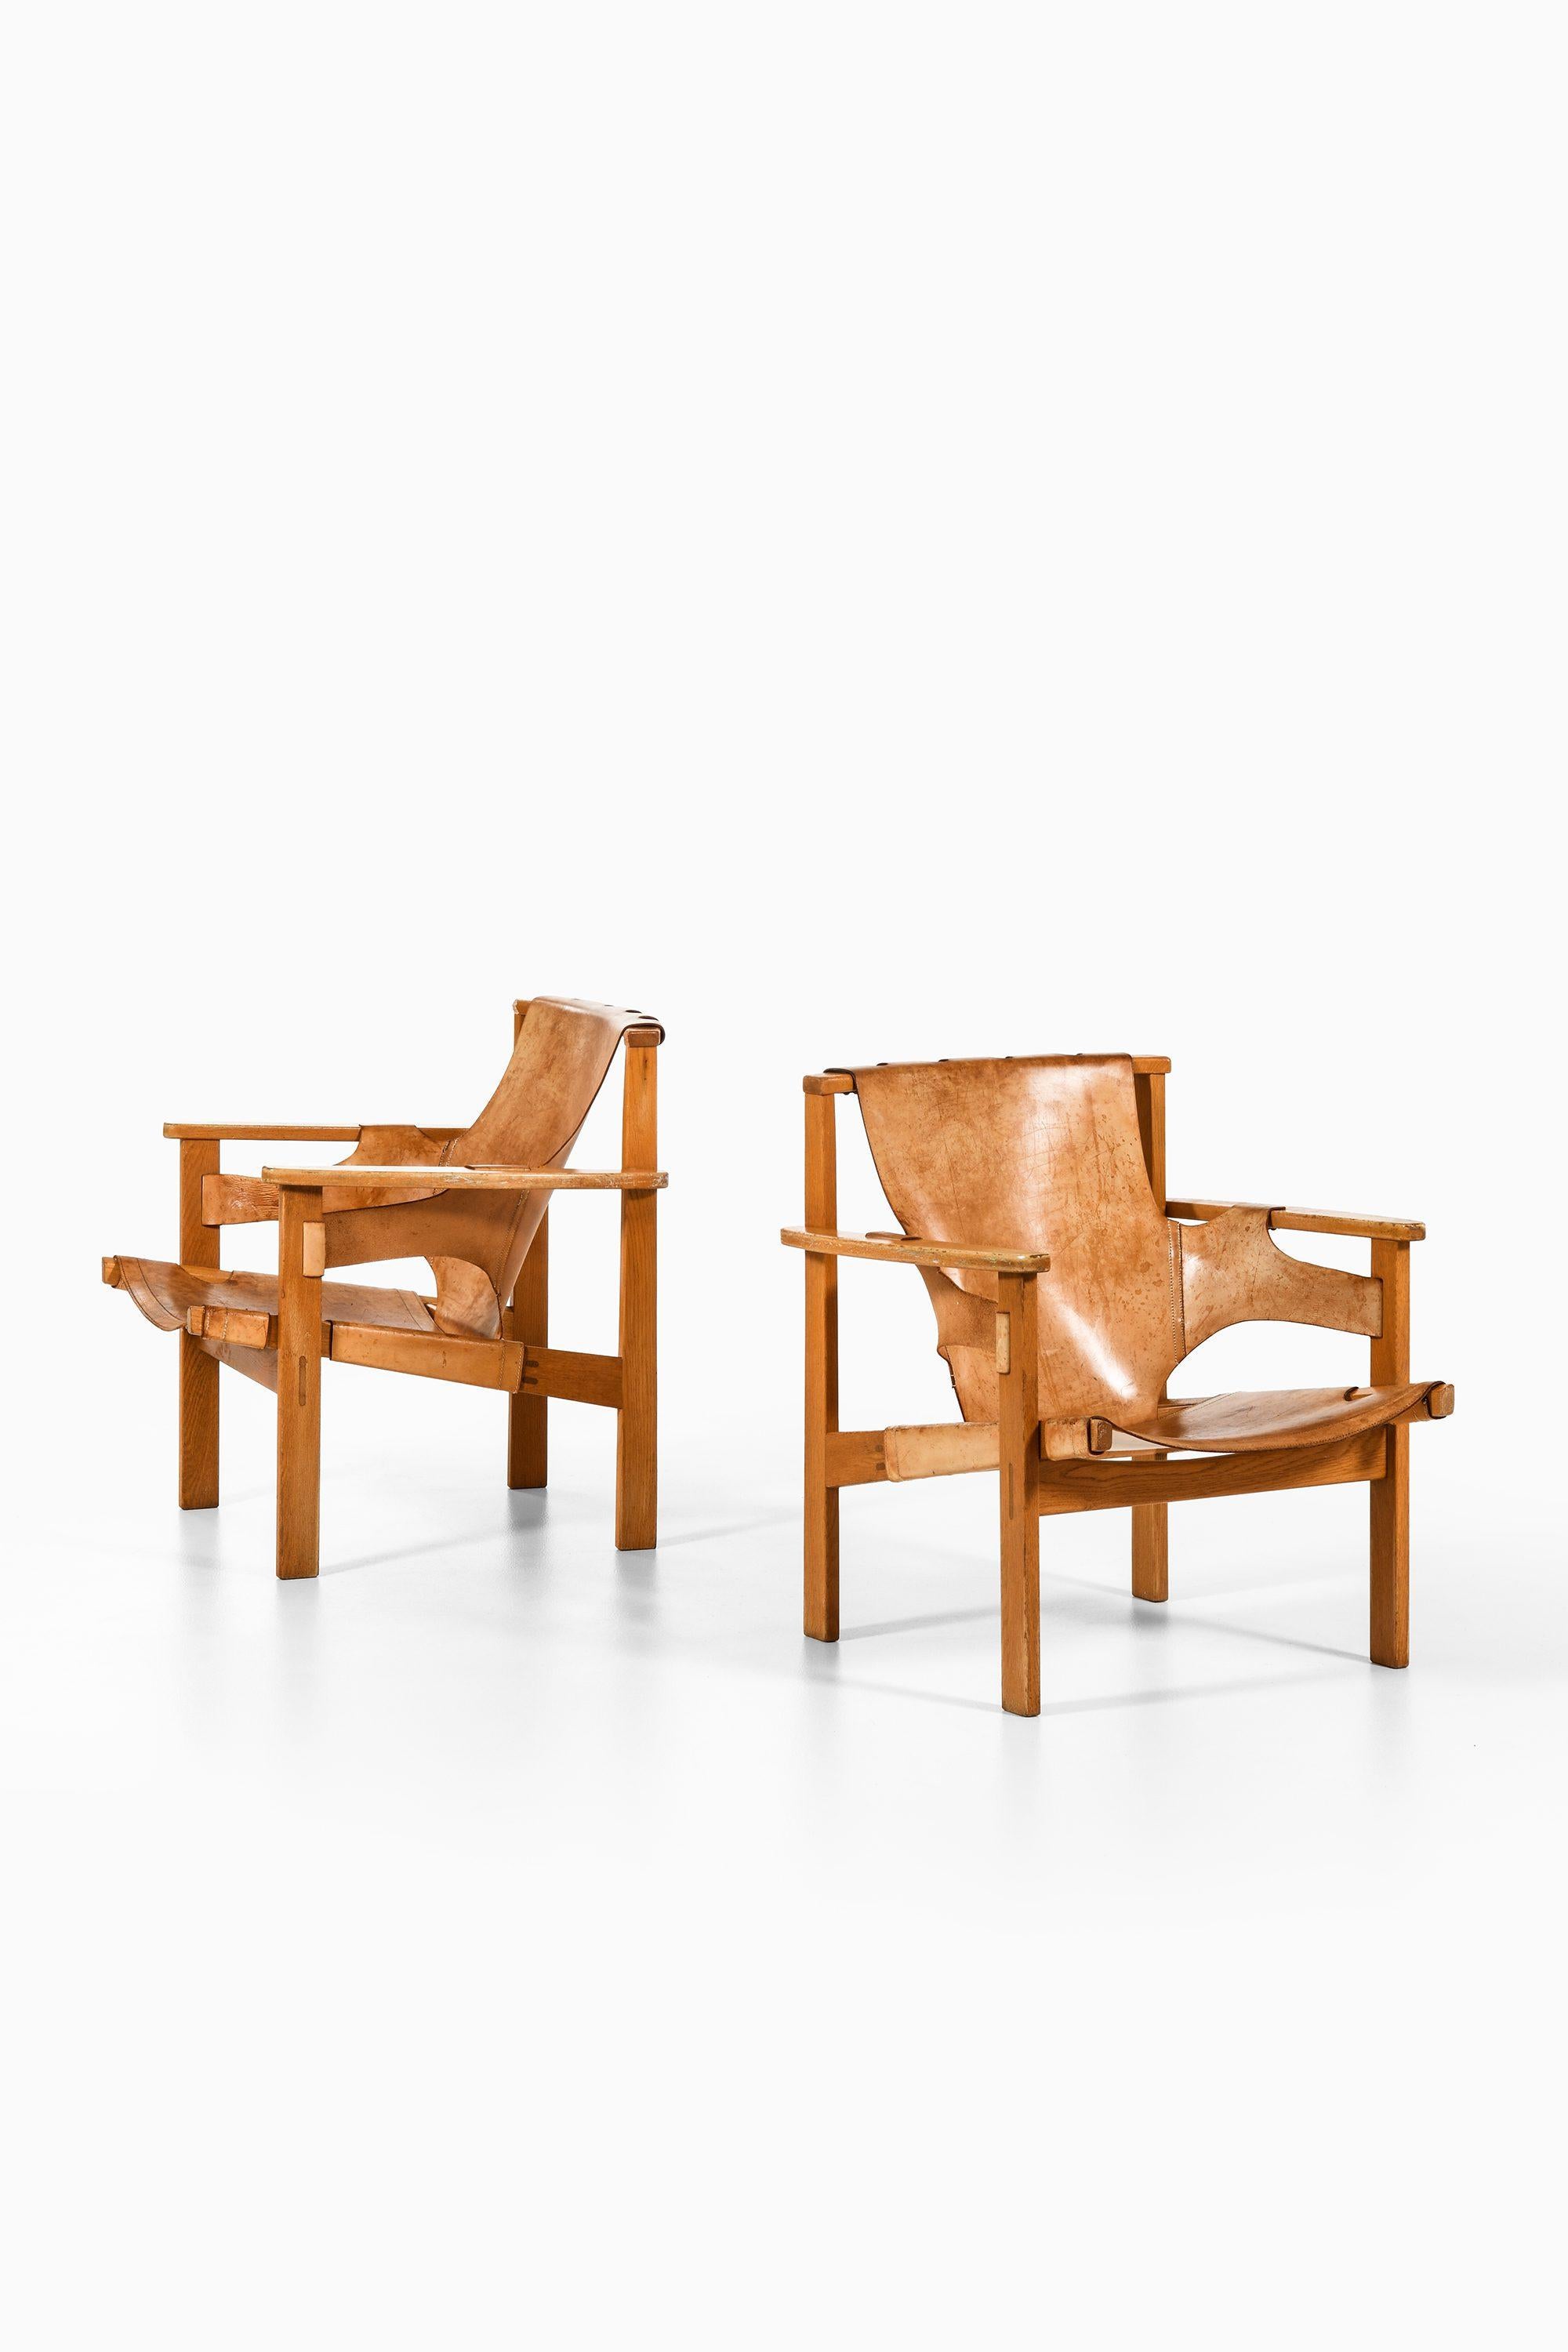 Scandinavian Modern Pair of Trienna Easy Chairs in Oak & Original Leather by Carl-Axel Acking, 1957 For Sale